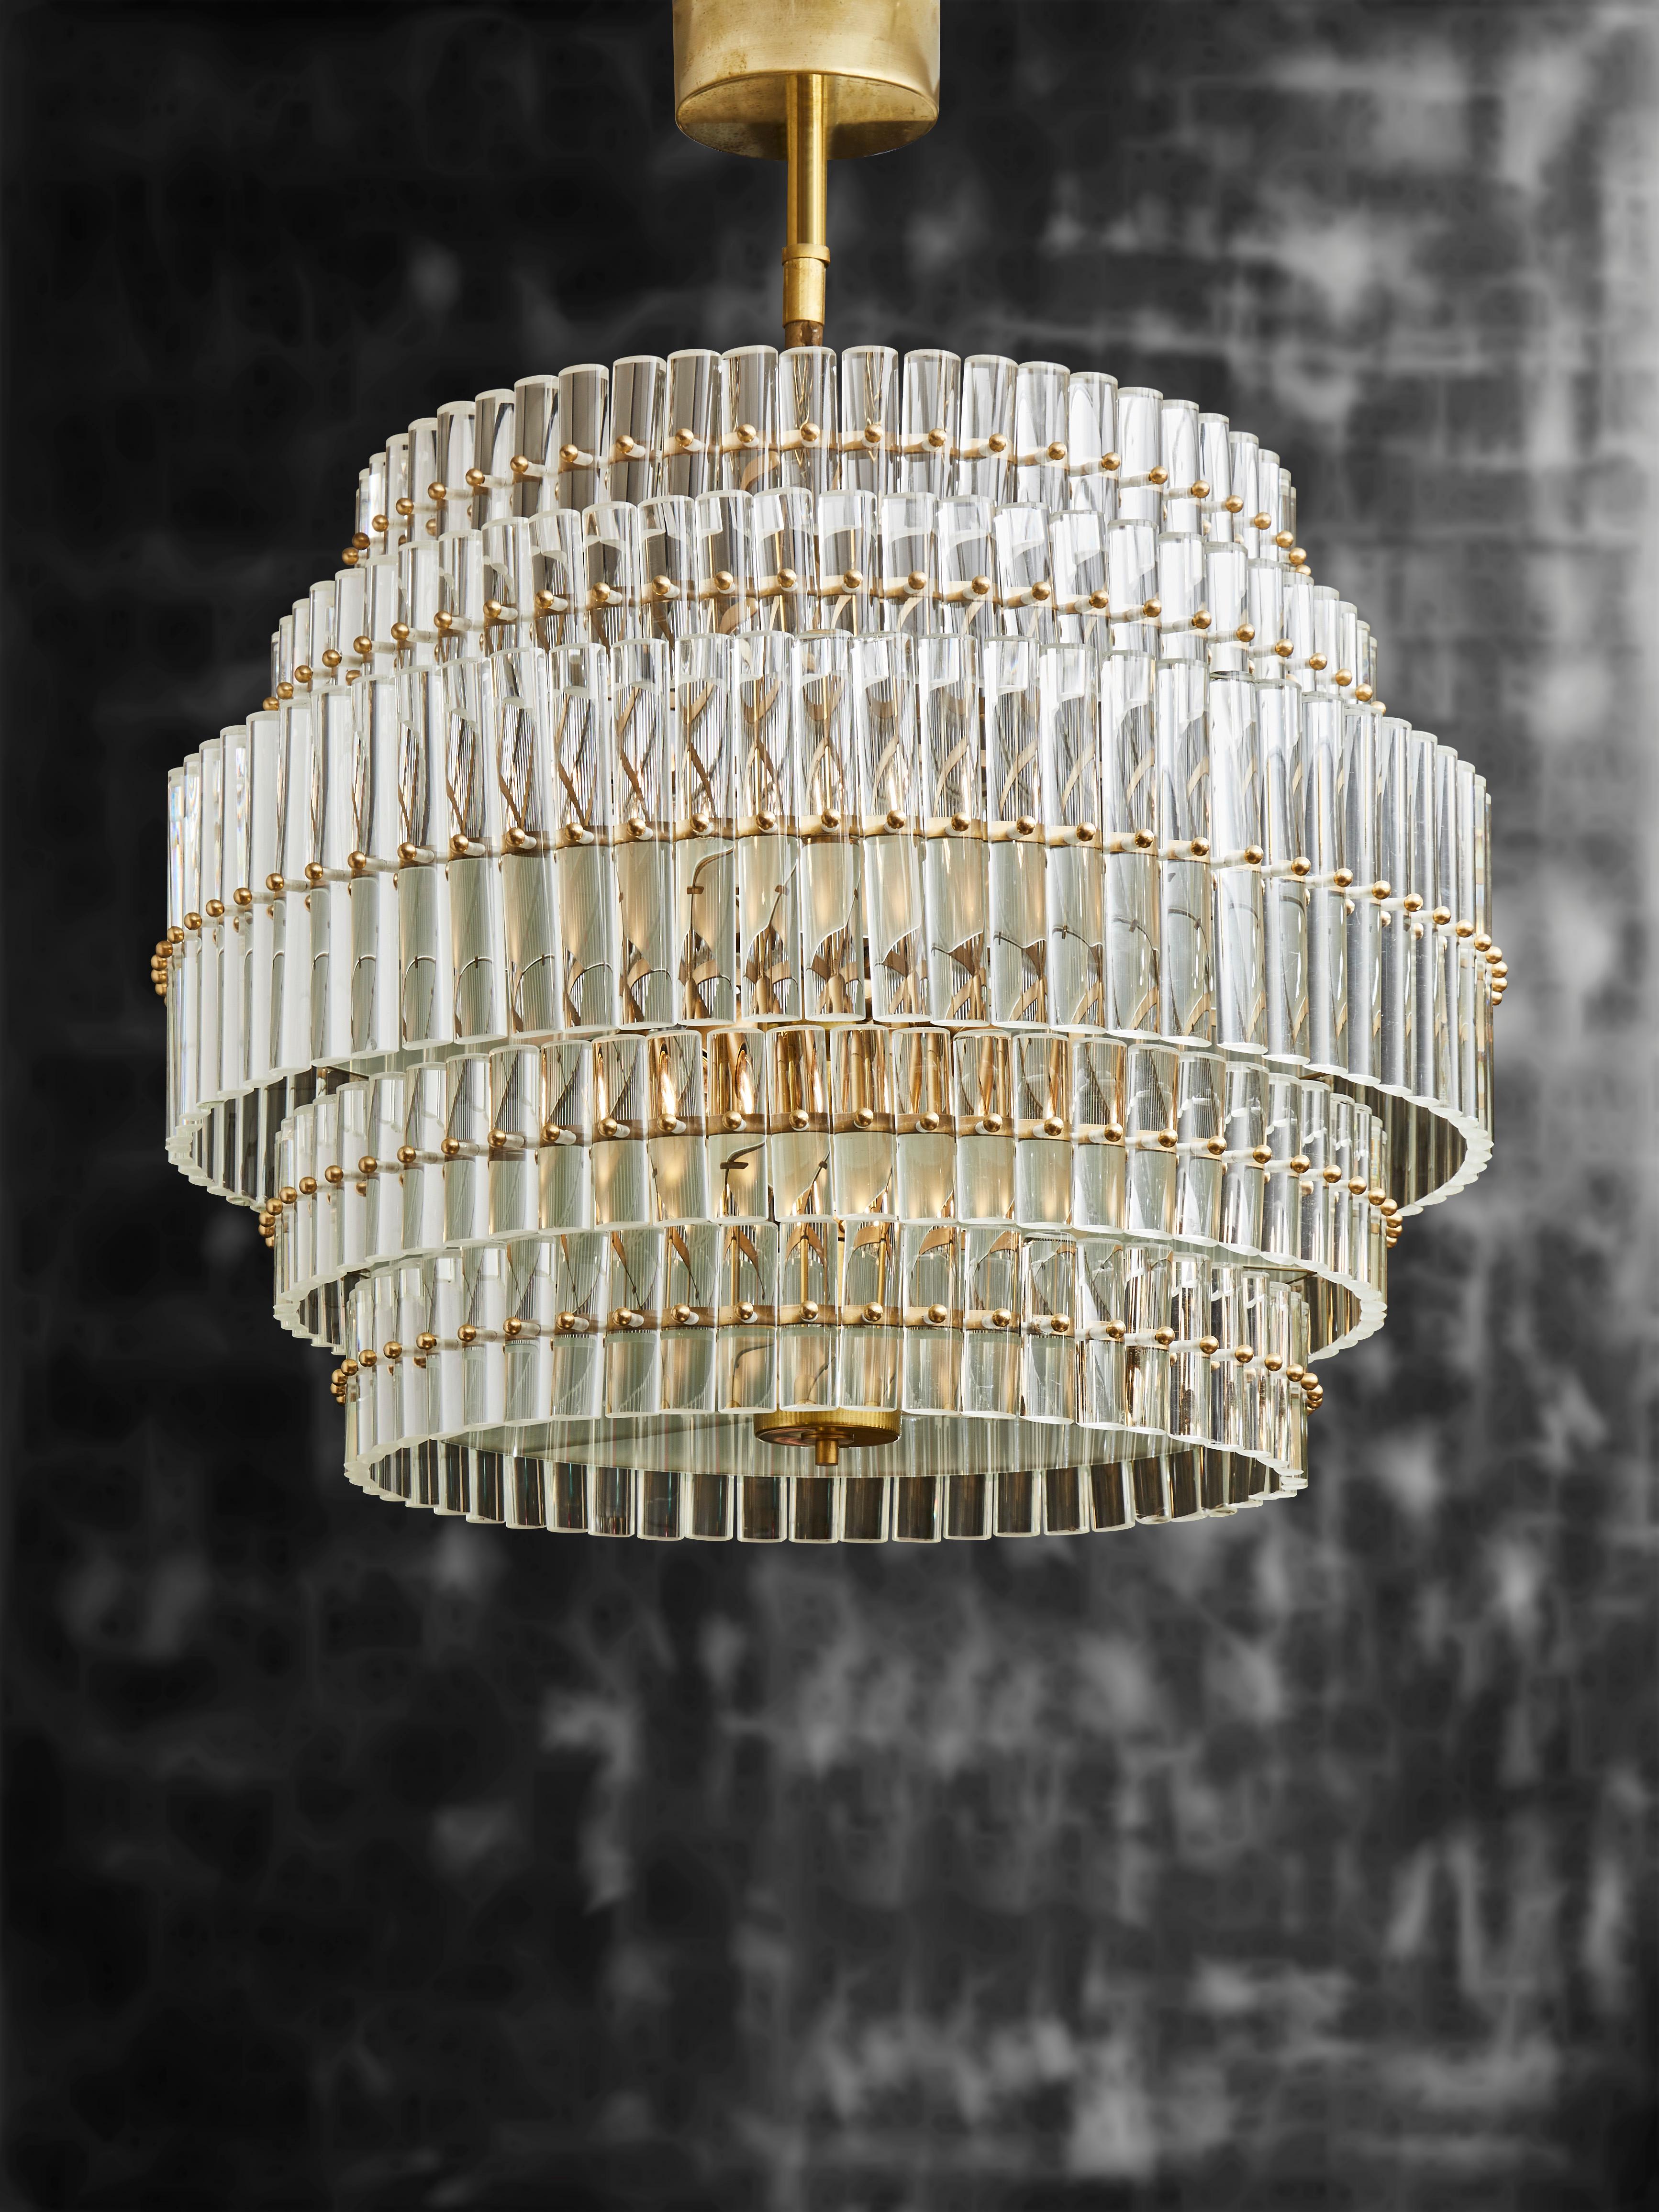 Circular chandelier made of several layers of rounded glass rods individually screwed to the structure.

Each floor has a different diameter adding volume to the piece, while the frosted glass sheets between the layers help spread the light and